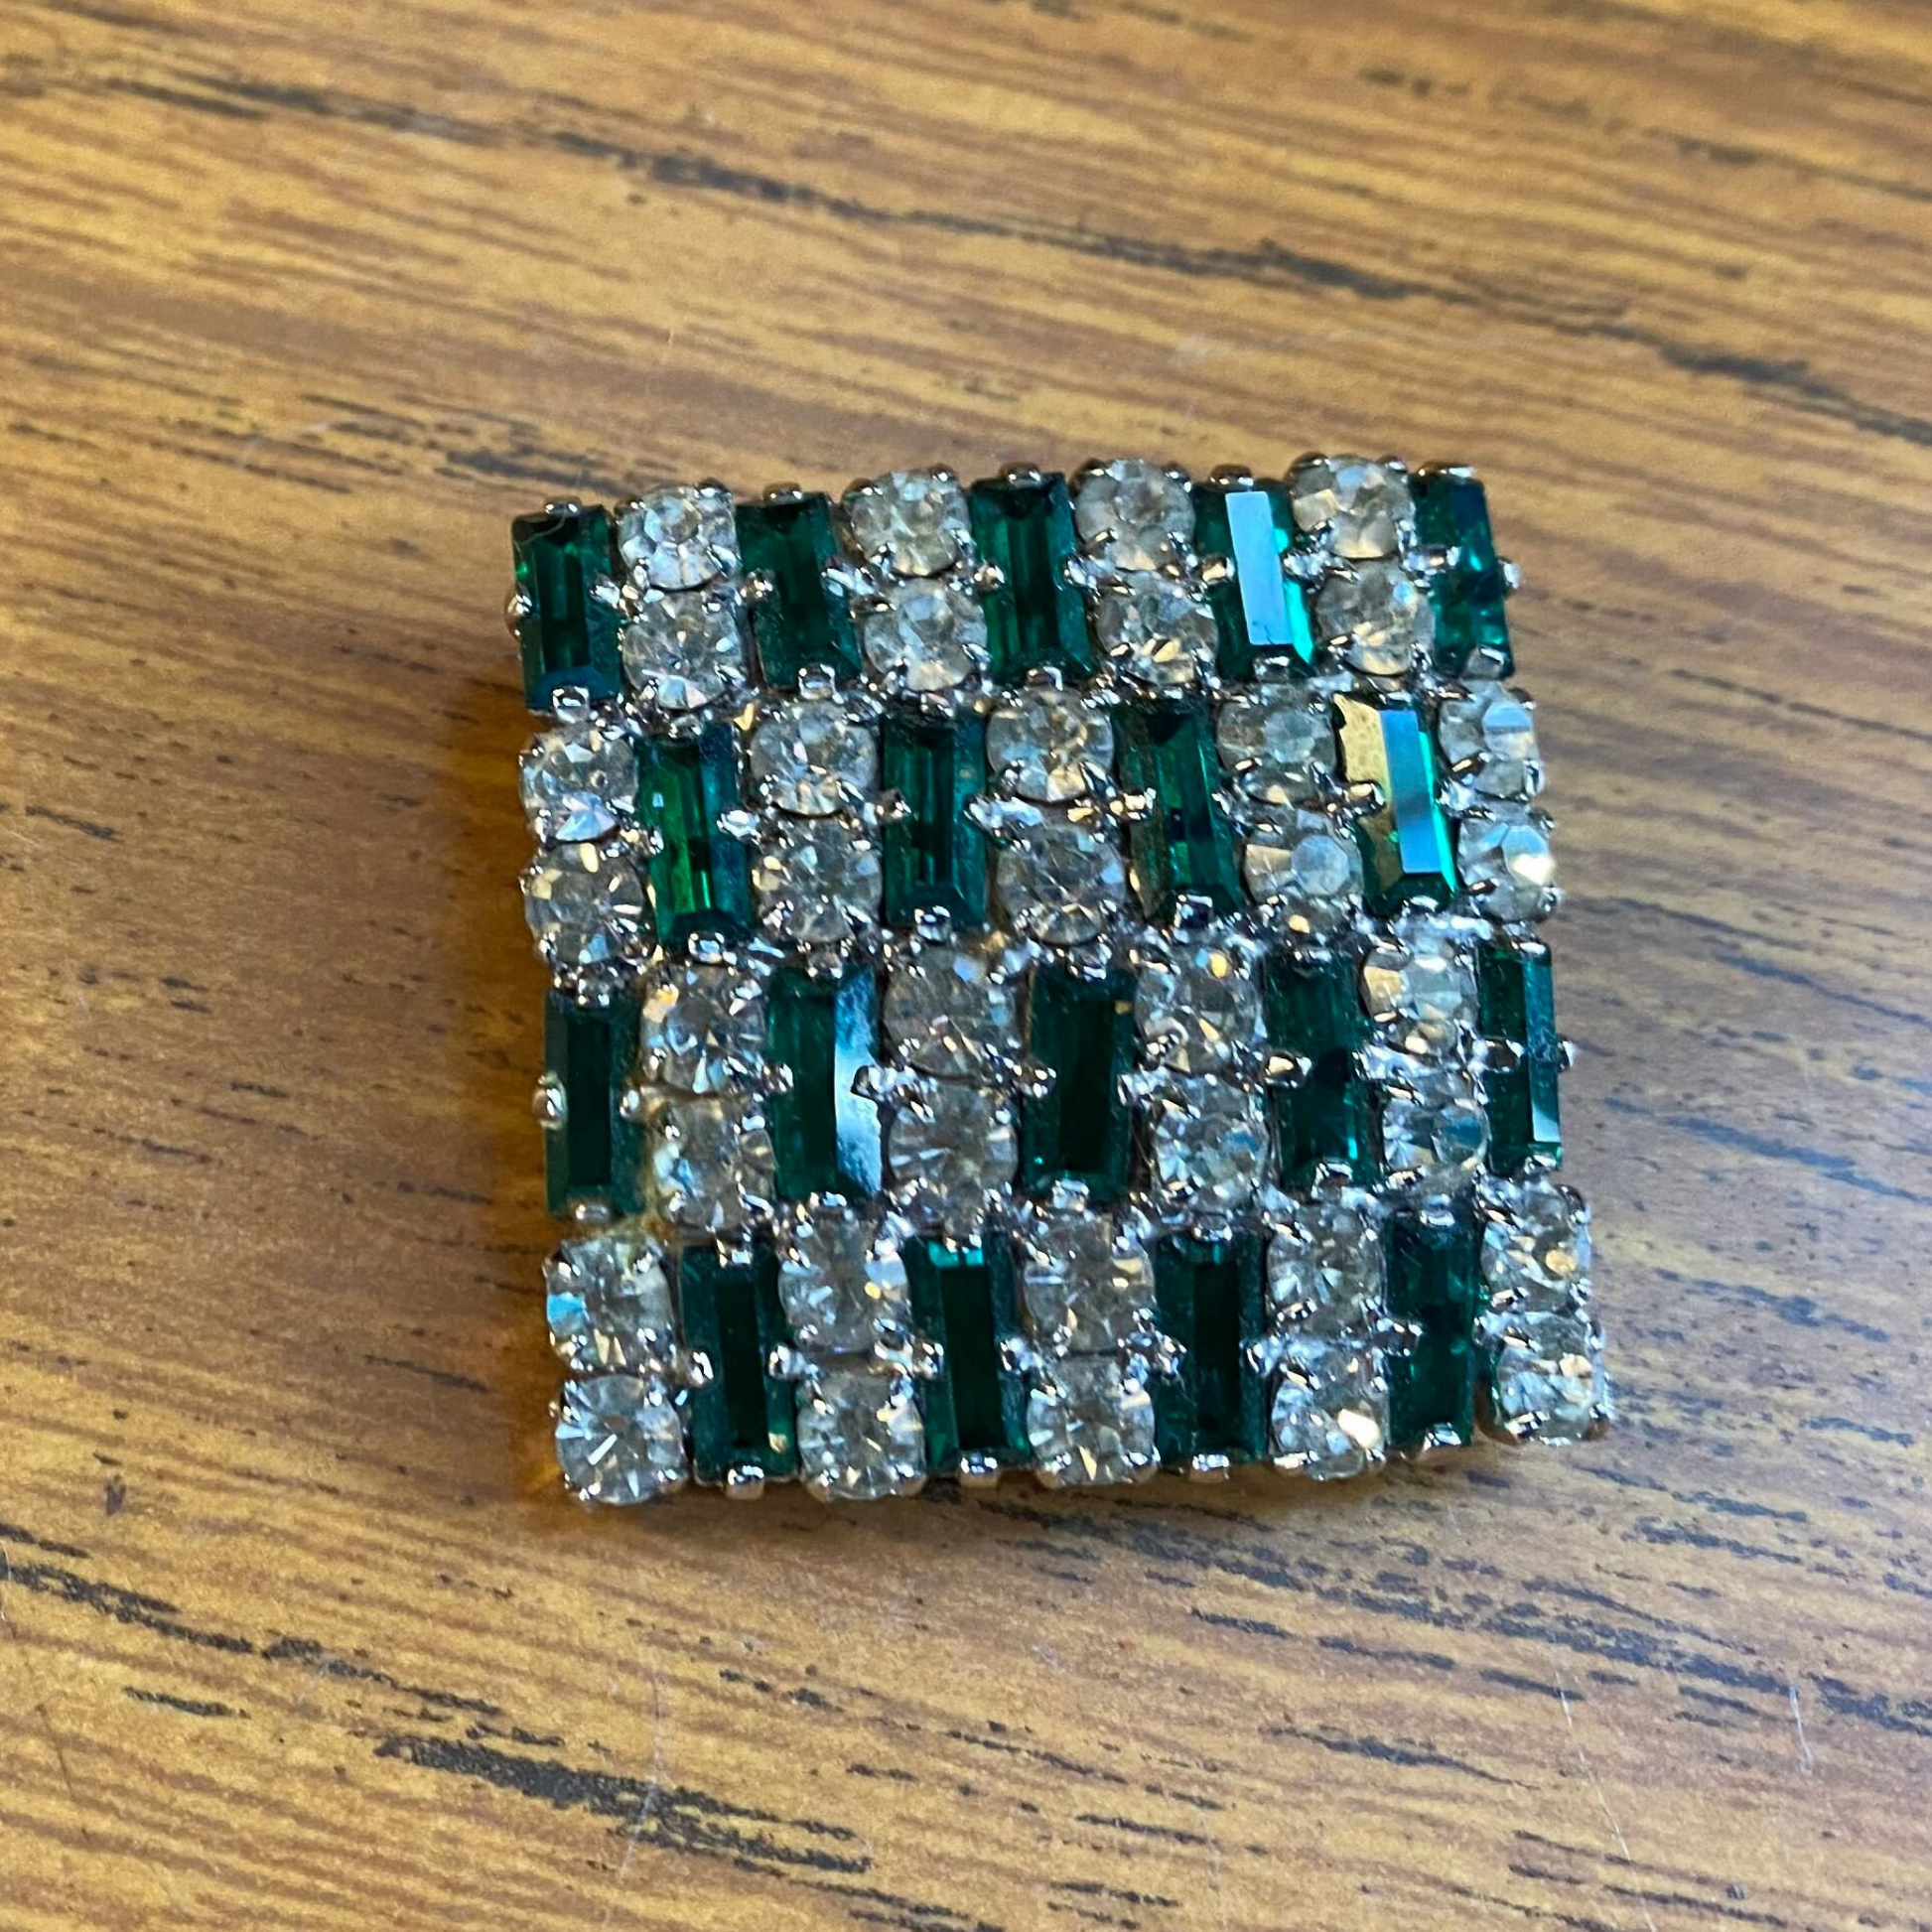 Vintage square brooch with green and diamanté accents - Perfect gift idea for any occasion